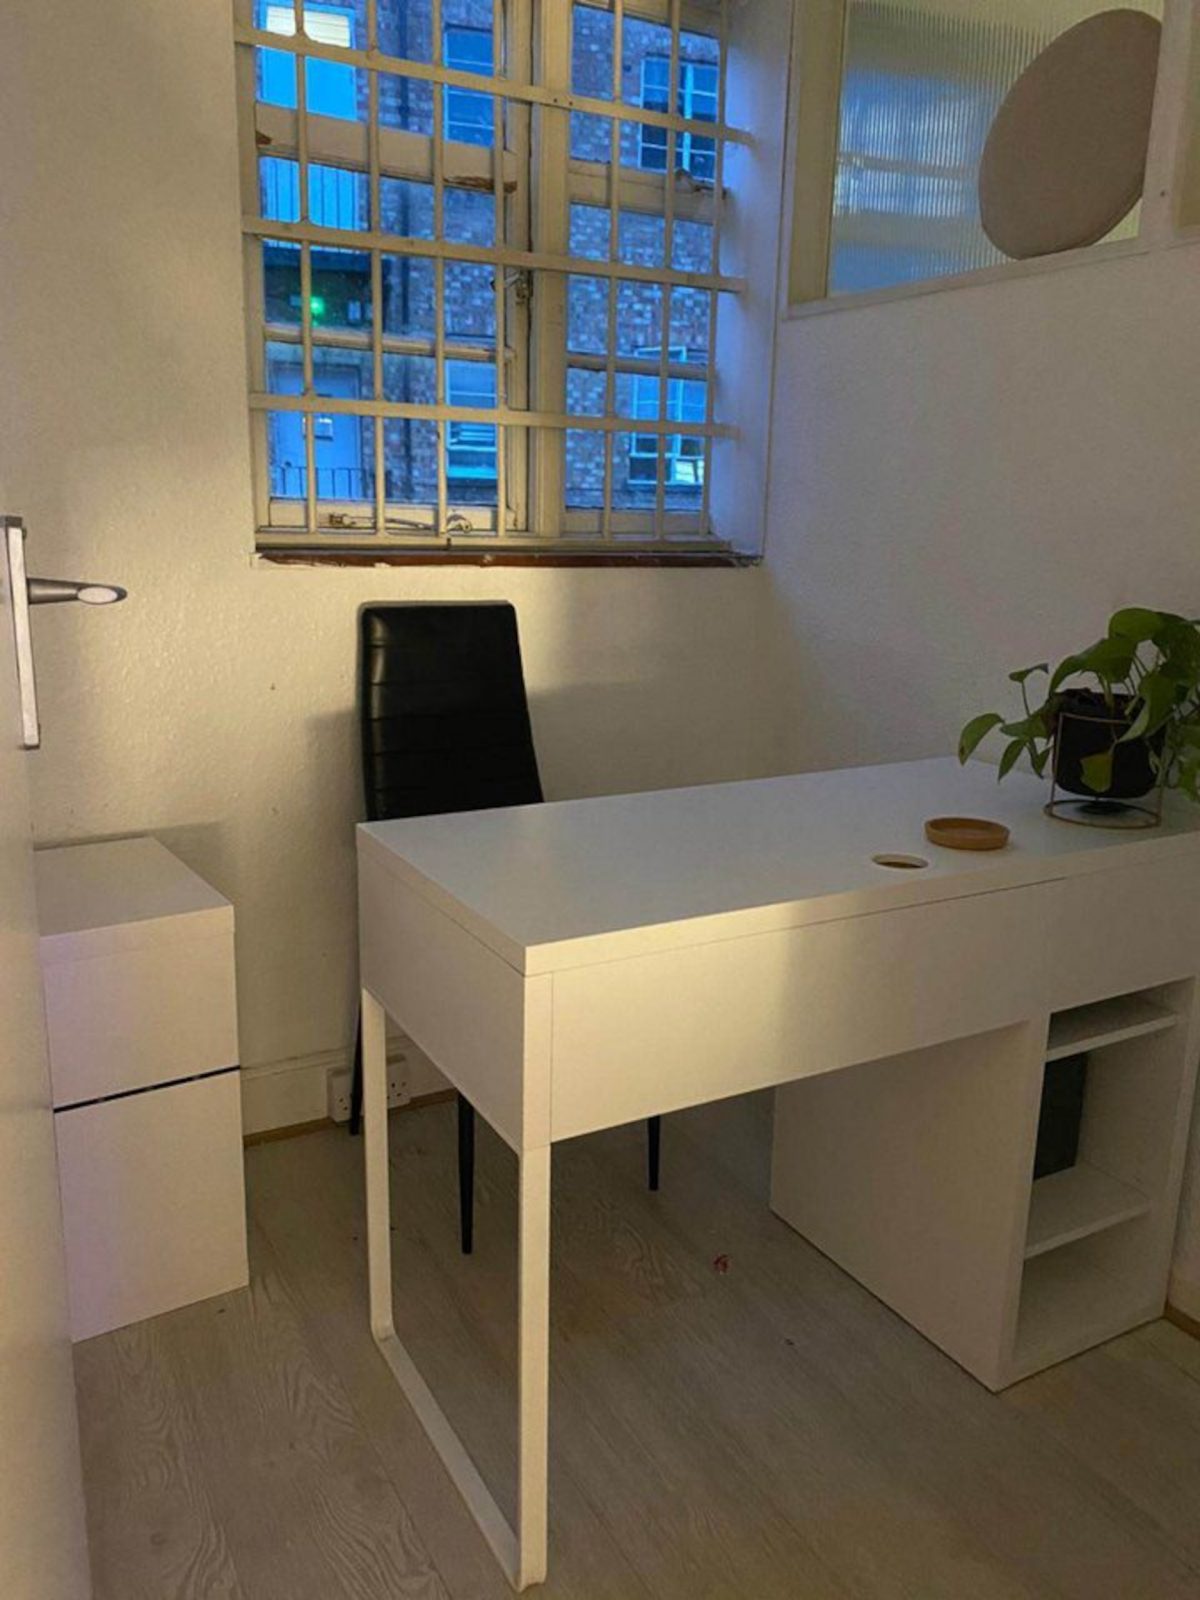 The tiny London office space for rent.